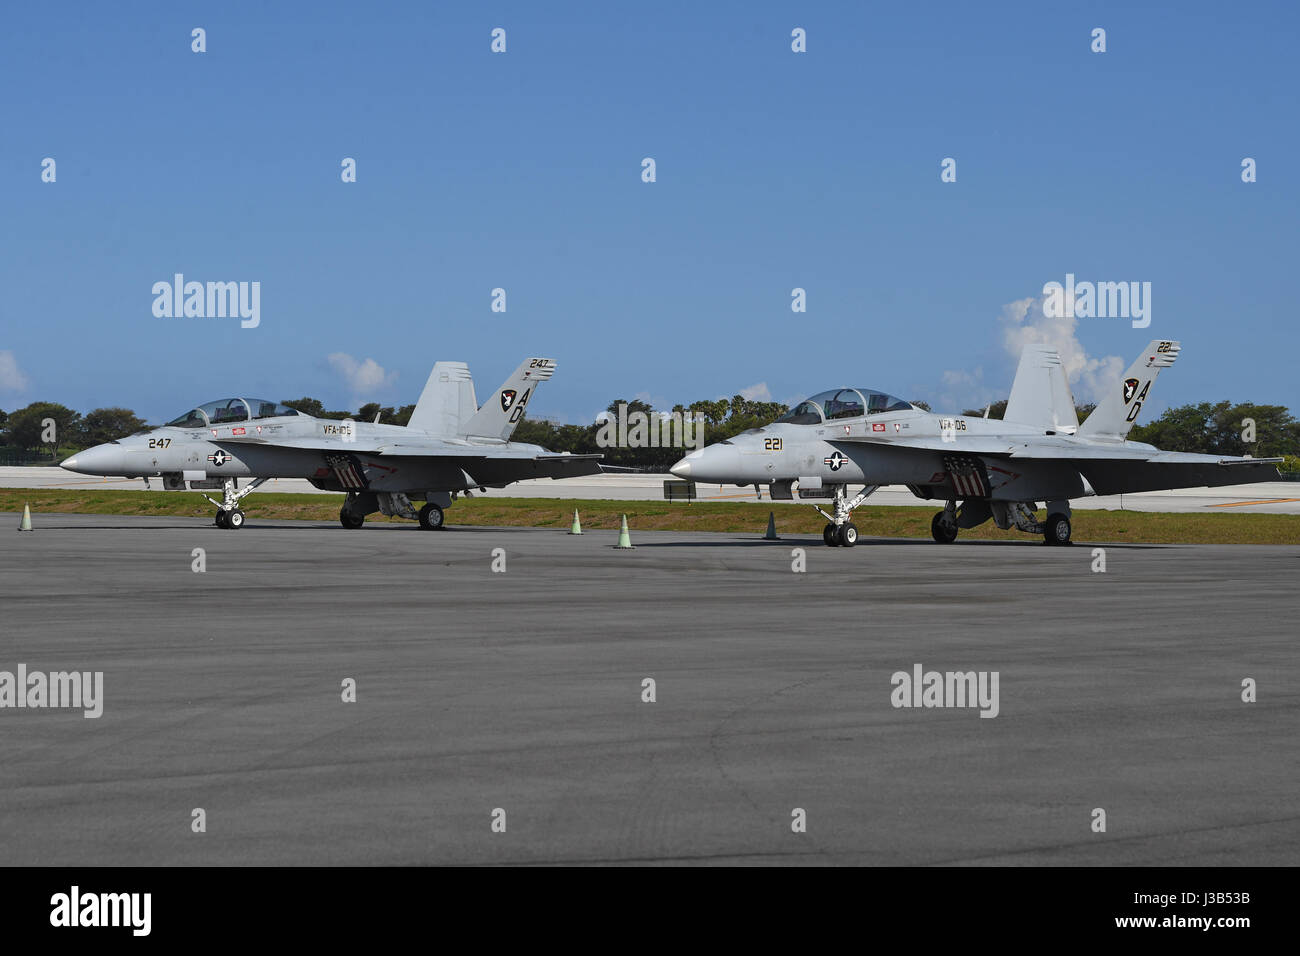 FORT LAUDERDALE FL - MAY 04: U.S. Navy F/A-18F Super Hornets sit on the tarmac at Fort Lauderdale Executive Airport during Fort Lauderdale Air Show Media day on May 4, 2017 in Fort Lauderdale, Florida. Credit: mpi04/MediaPunch Stock Photo